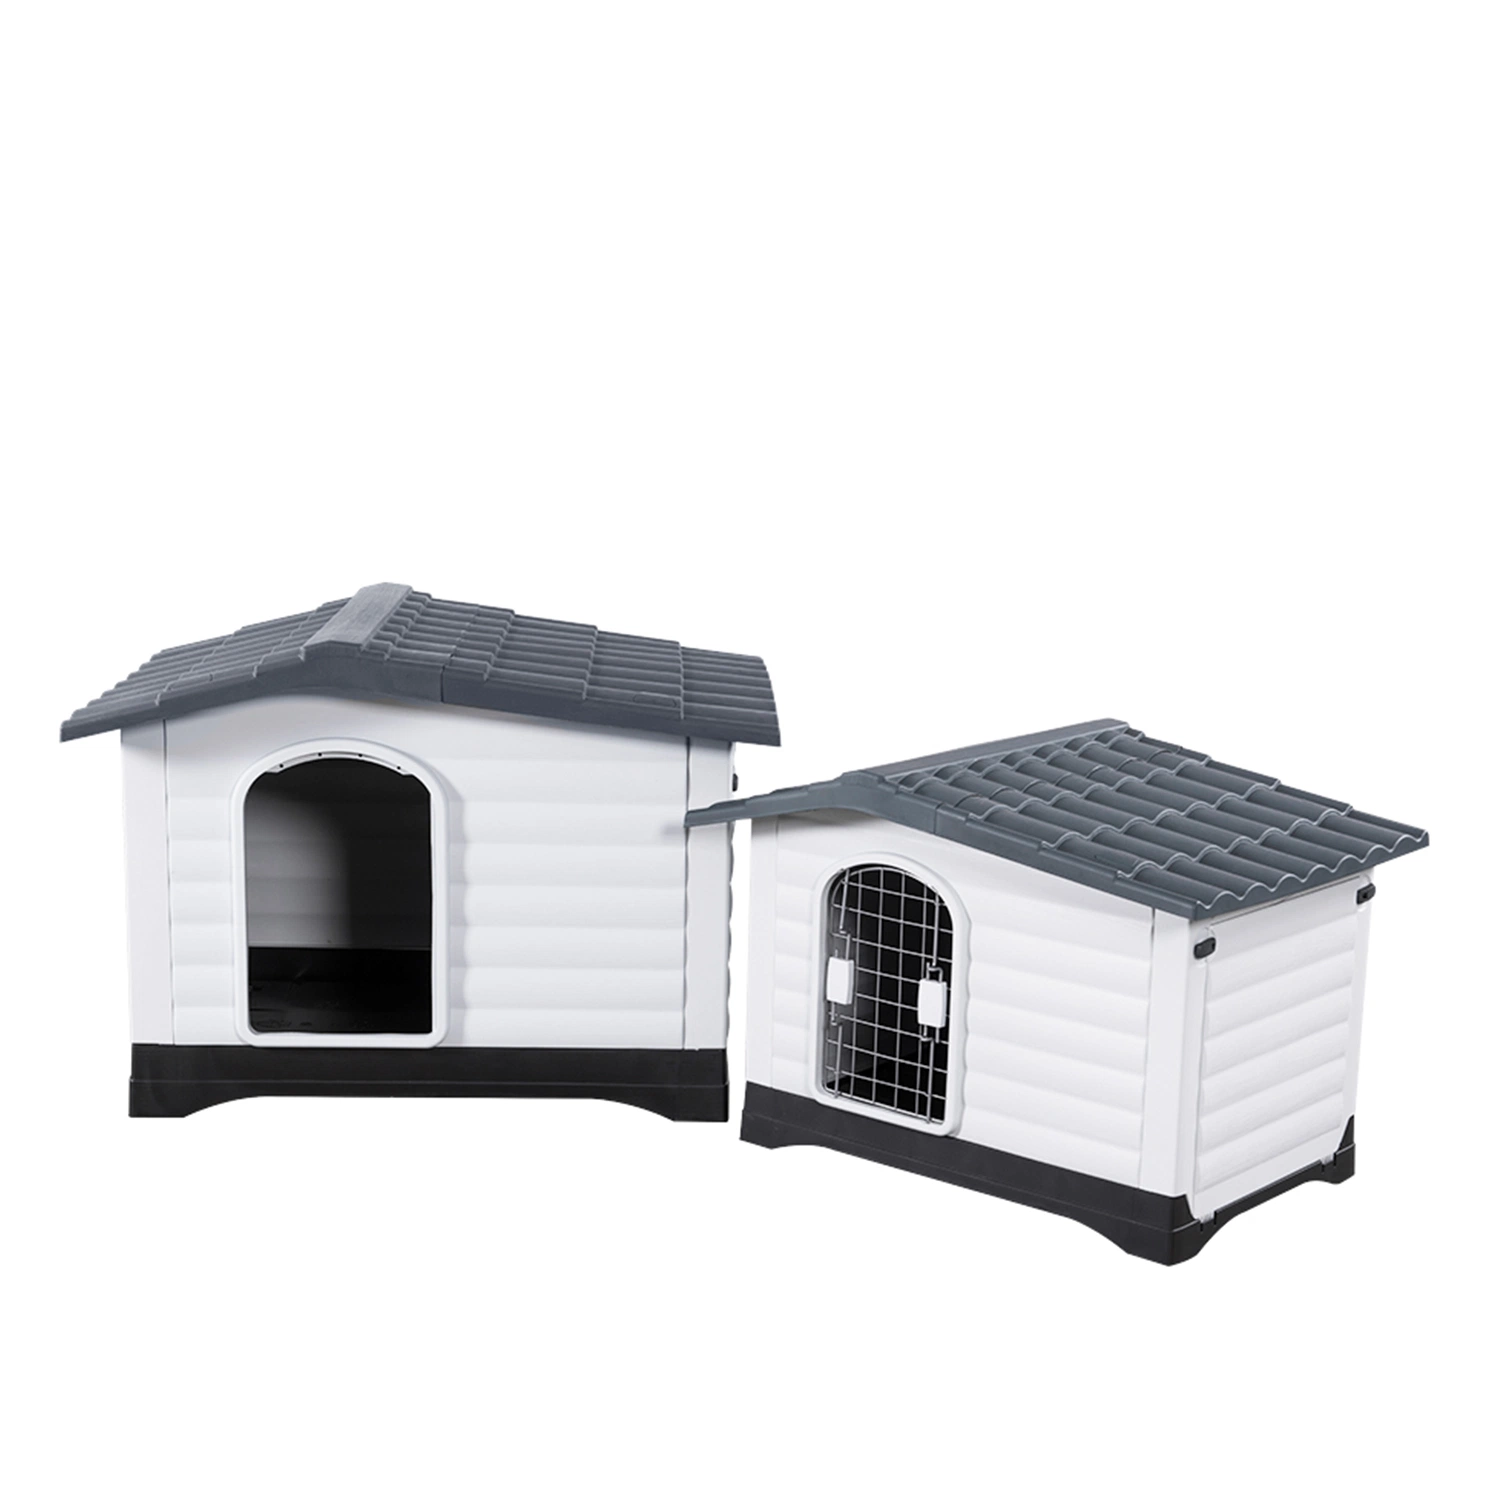 Waterproof Ventilate Pet Kennel All-Season Availability Indoor/Outdoor Plastic Pet Dog Houses for Sale